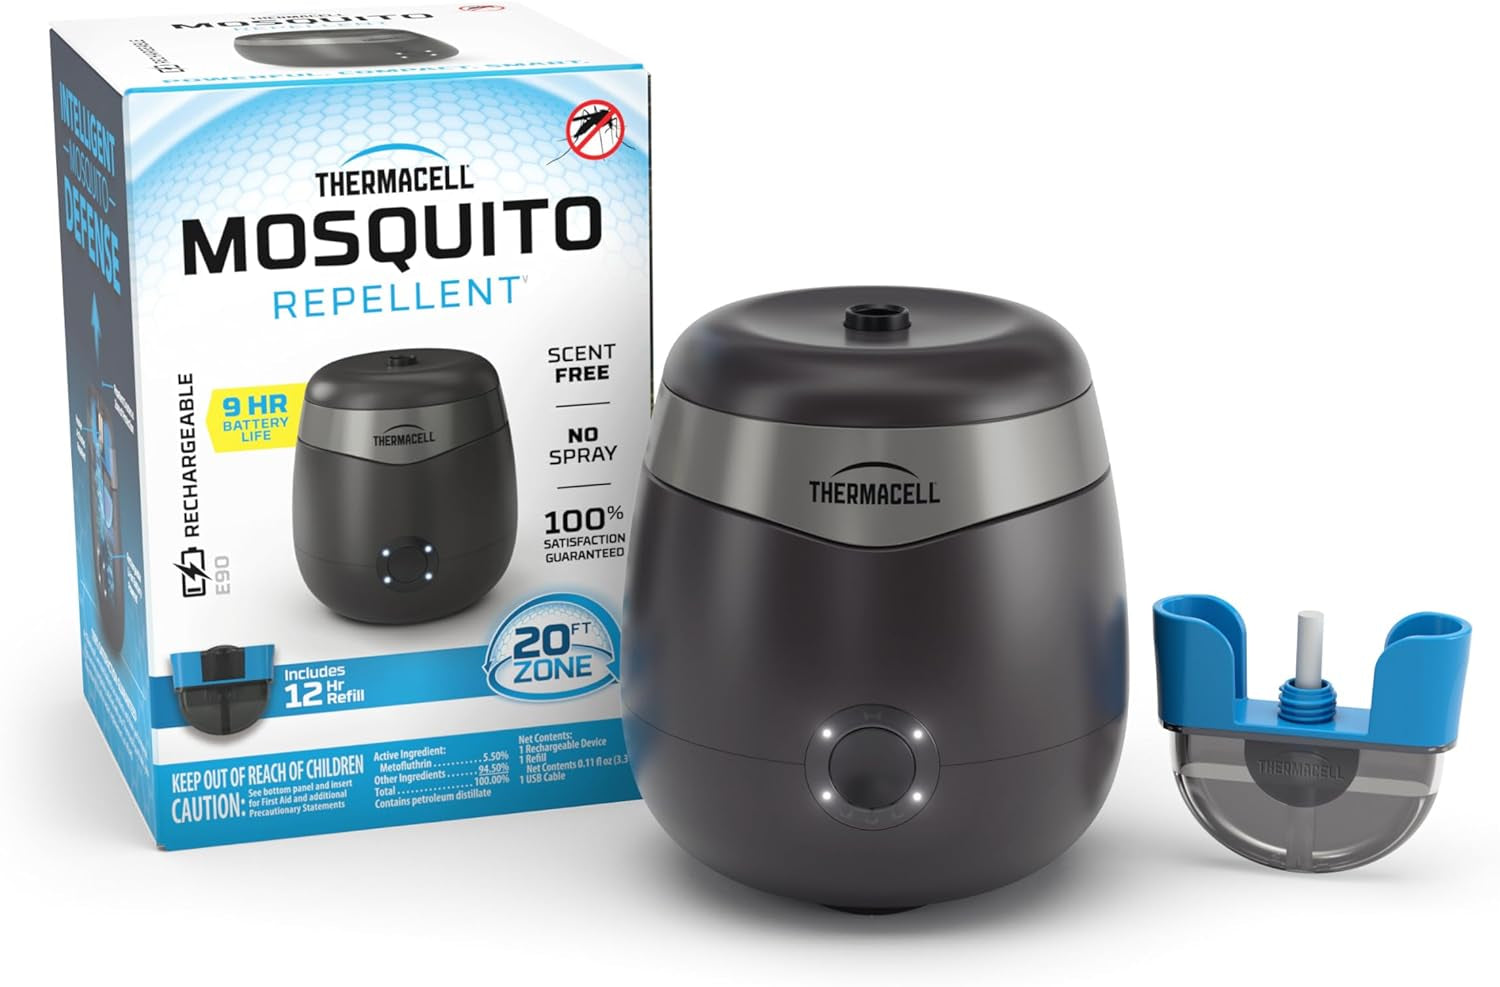 Thermacell Patio Shield Mosquito Repellent E-Series Rechargeable Repeller; 20’ Mosquito Protection Zone; Includes 12-Hour Repellent Refill; No Spray, Flame or Scent; Bug Spray Alternative